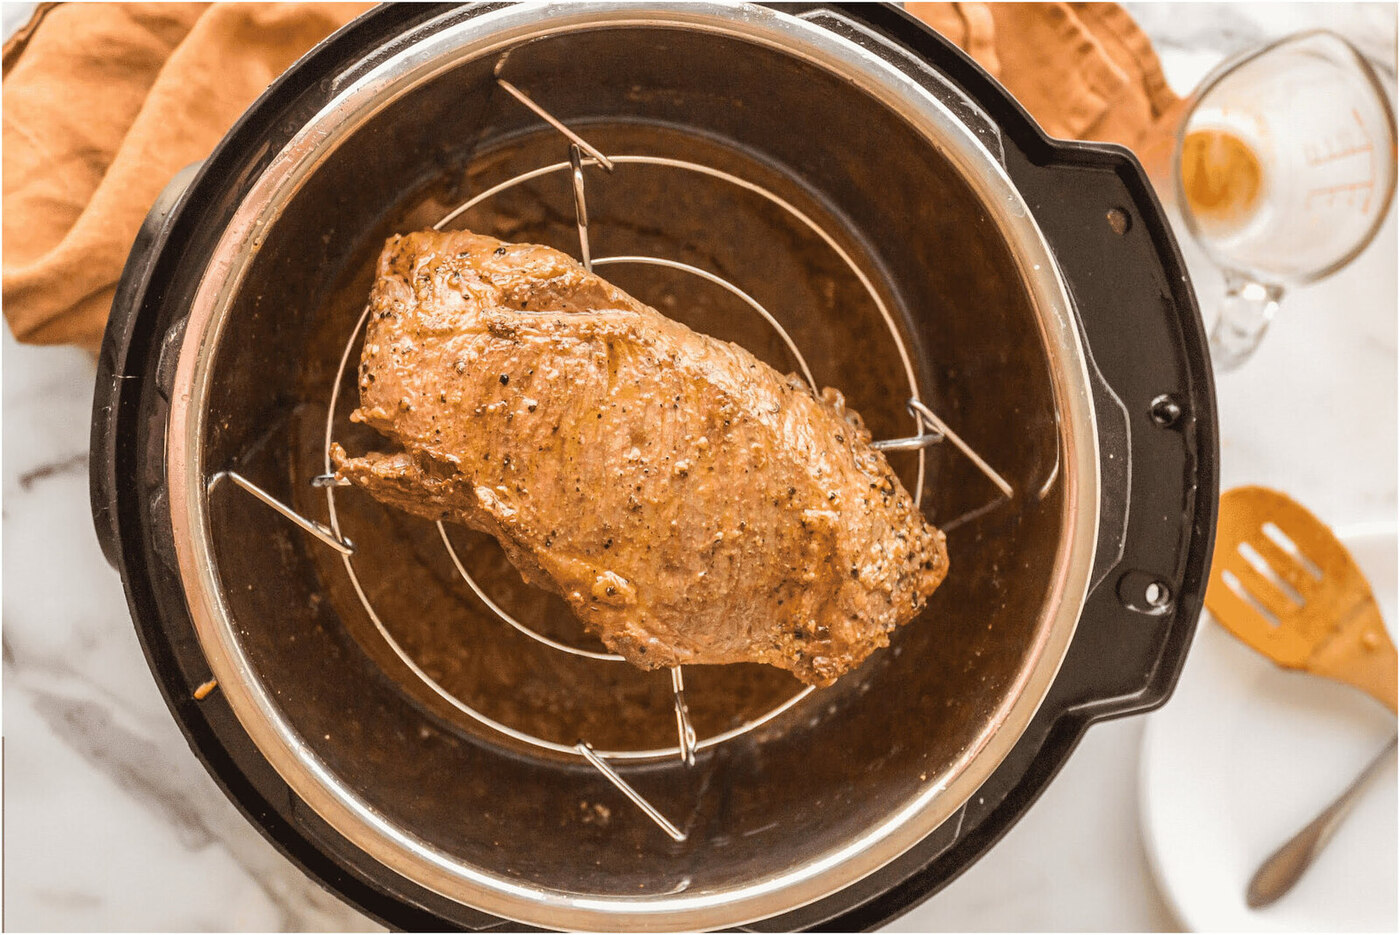 https://storables.com/wp-content/uploads/2023/07/how-to-use-an-electric-pressure-cooker-to-cook-a-tri-tip-1690711990.jpg